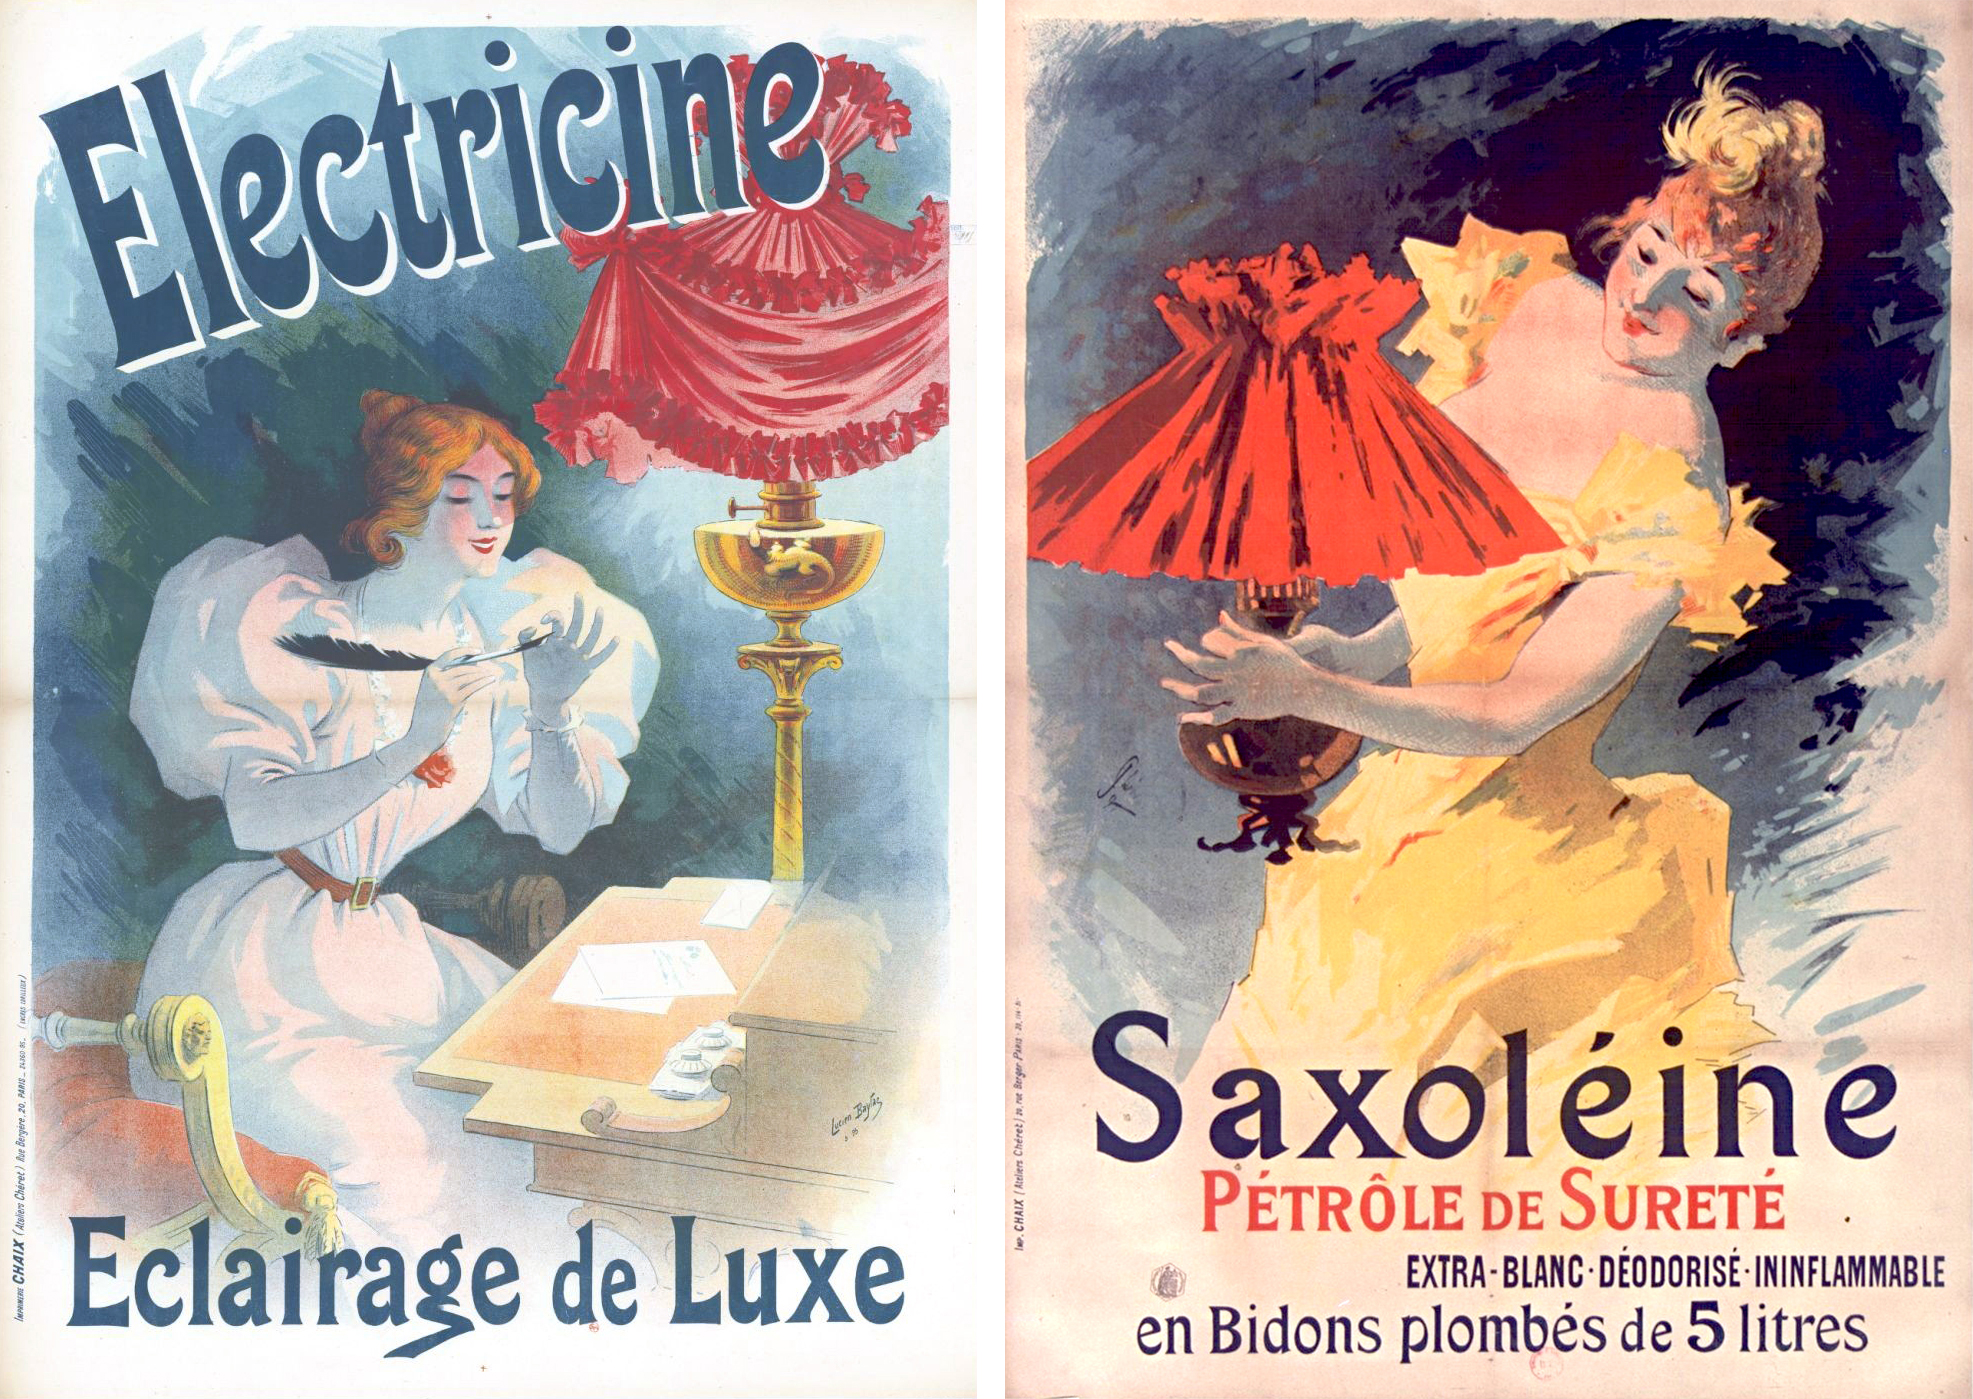 modernity-electricity-posters-xix